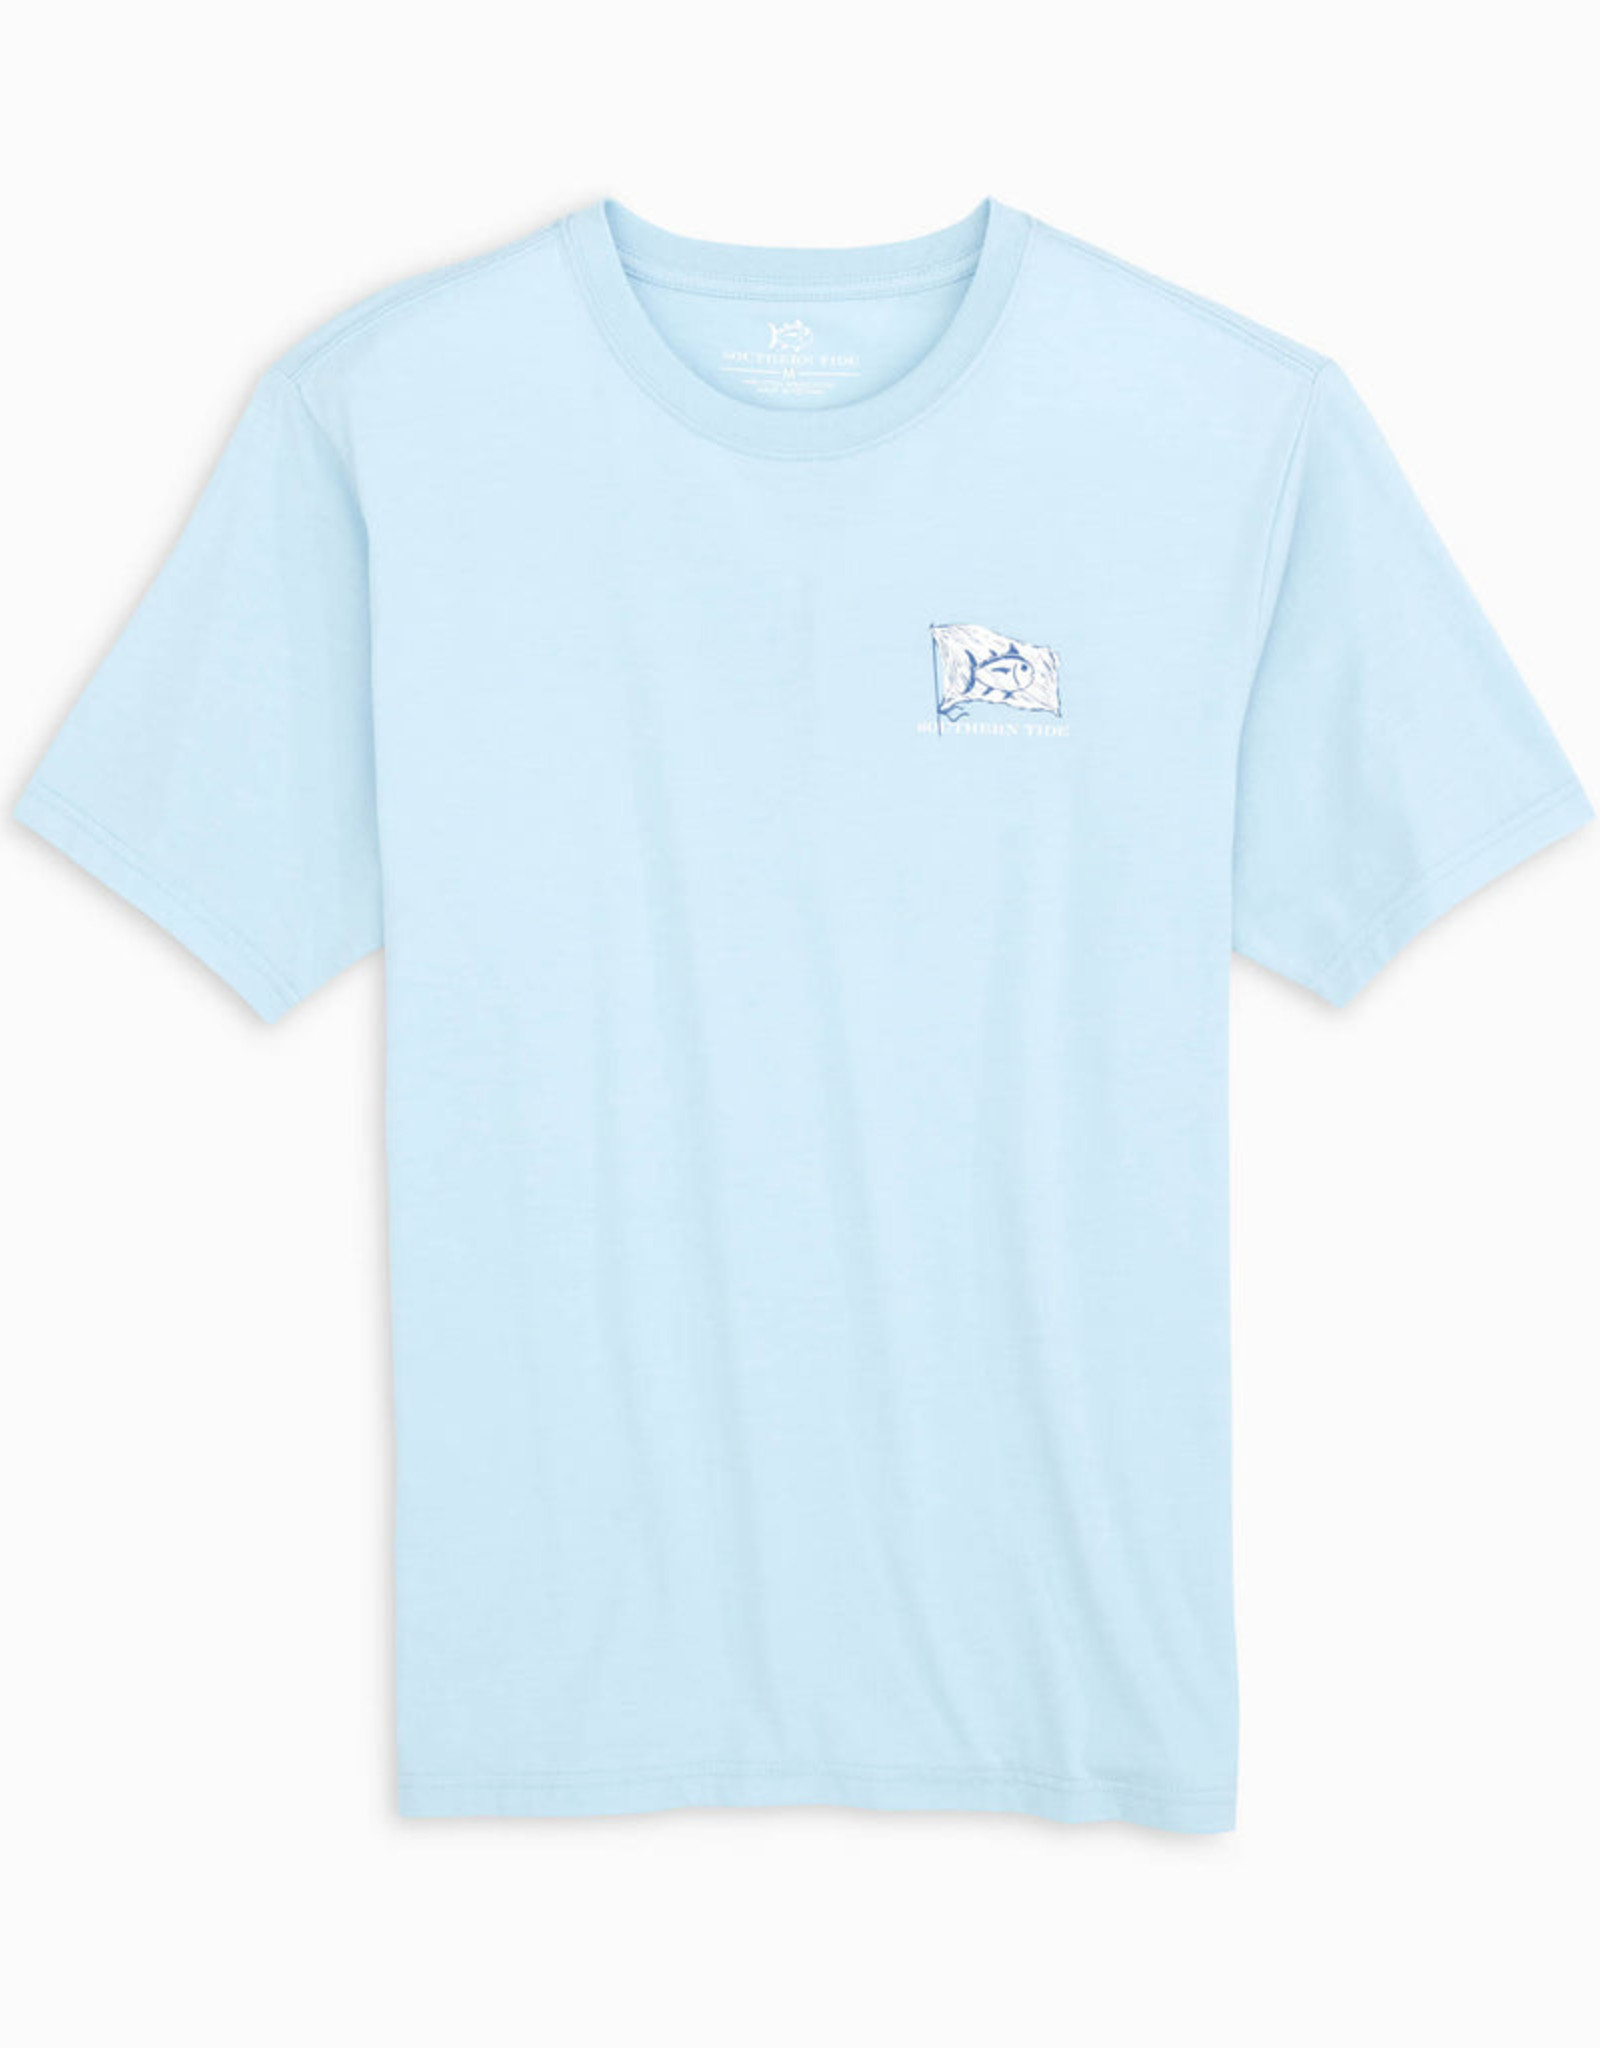 Southern Tide Dock By The Sea Tee